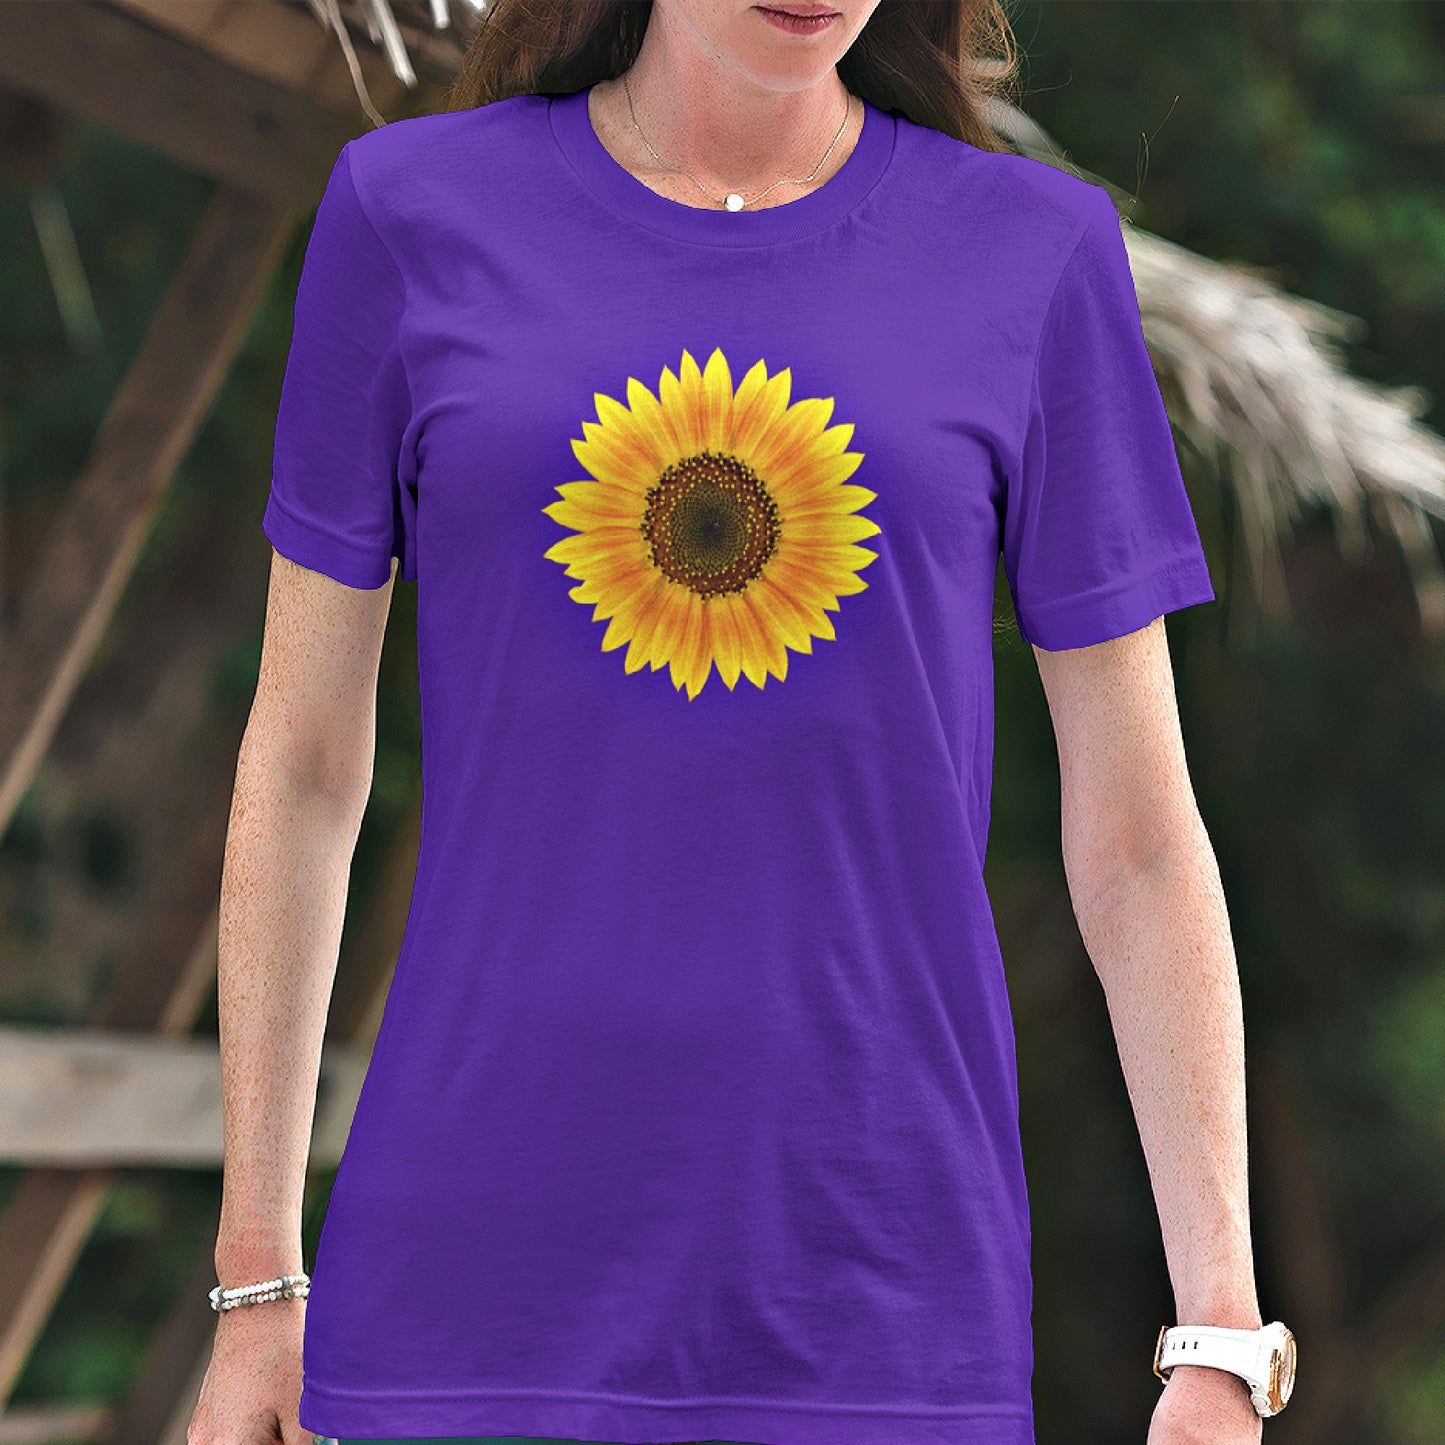 Mock up of a woman out on a walk while wearing our Purple Women's T-shirt